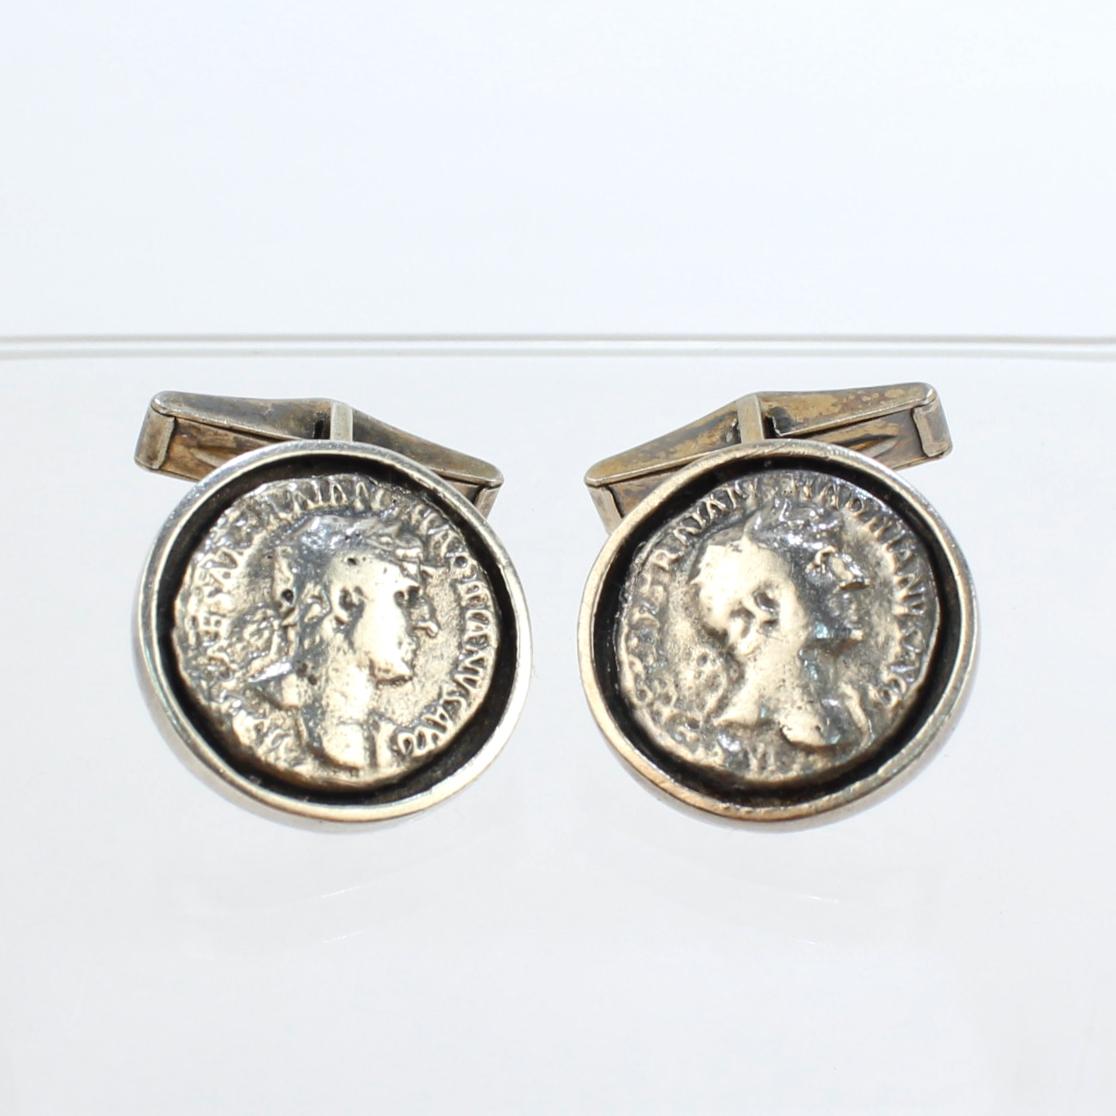 A fine pair of vintage sterling silver cufflinks.

Set with what we believe to be ancient Roman Denarius silver coins bearing the bust of the 2nd Century BCE Roman Emperor Hadrian.

Simply a fascinating pair of cufflinks!

Date:
20th